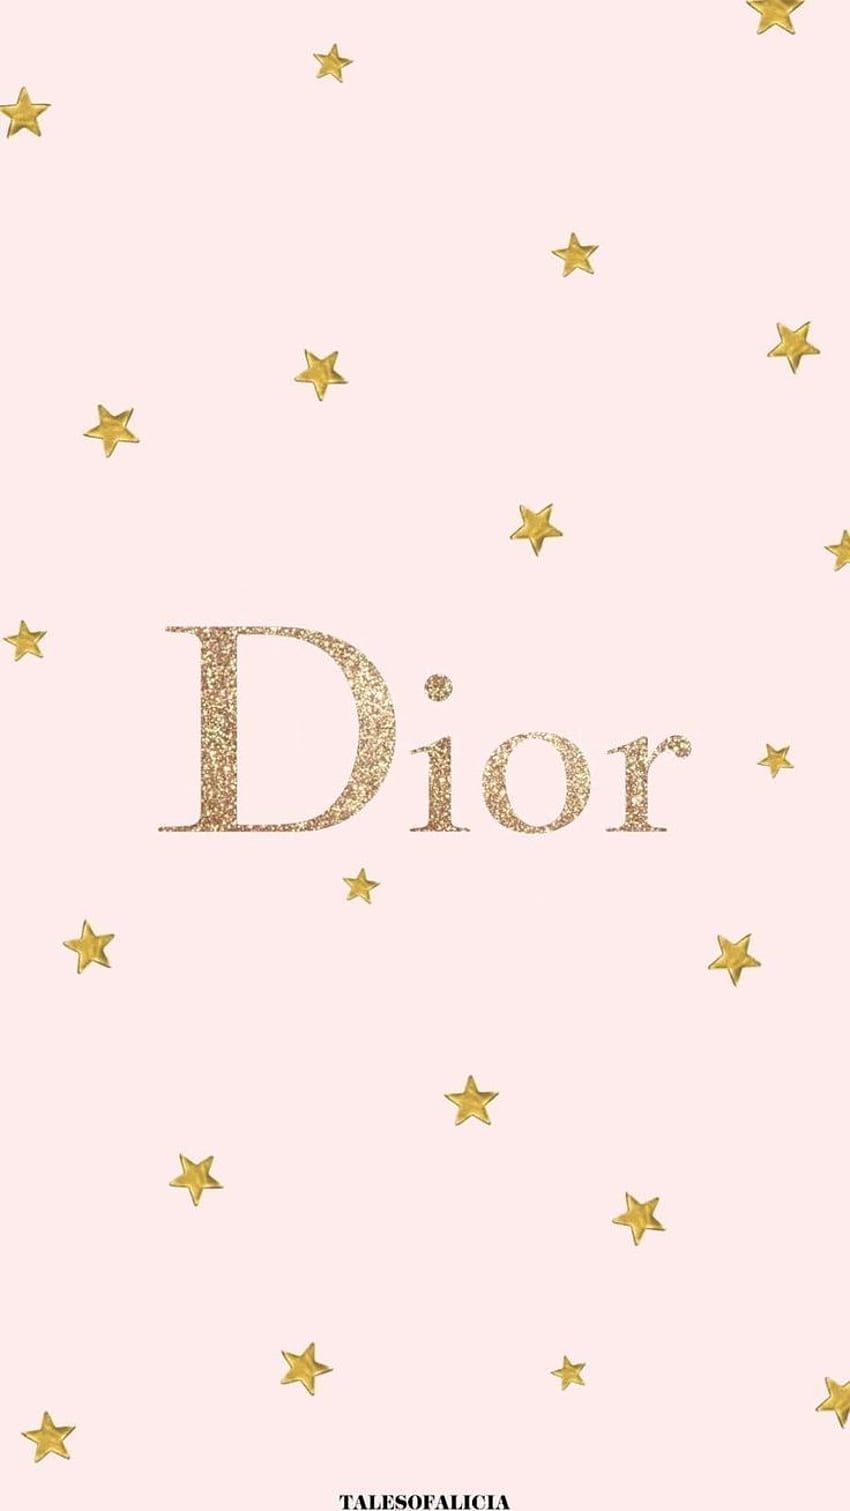 Dior logo with stars on a pink background - Vogue